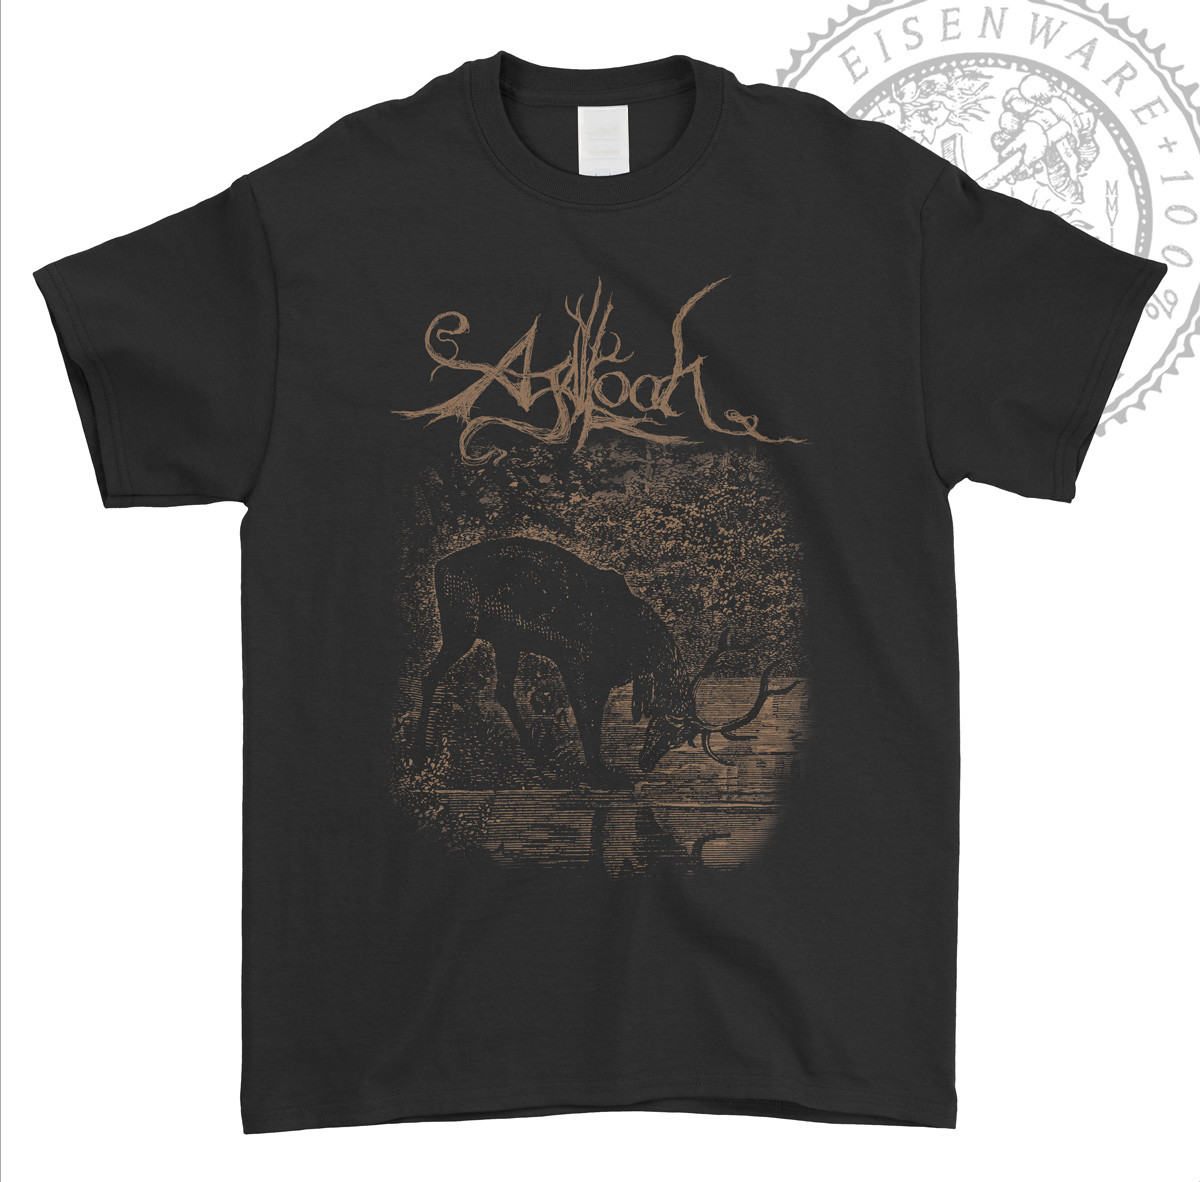 AGALLOCH - Of Stone, Wind, and Pillor, T-Shirt | Shirts | Merch ...